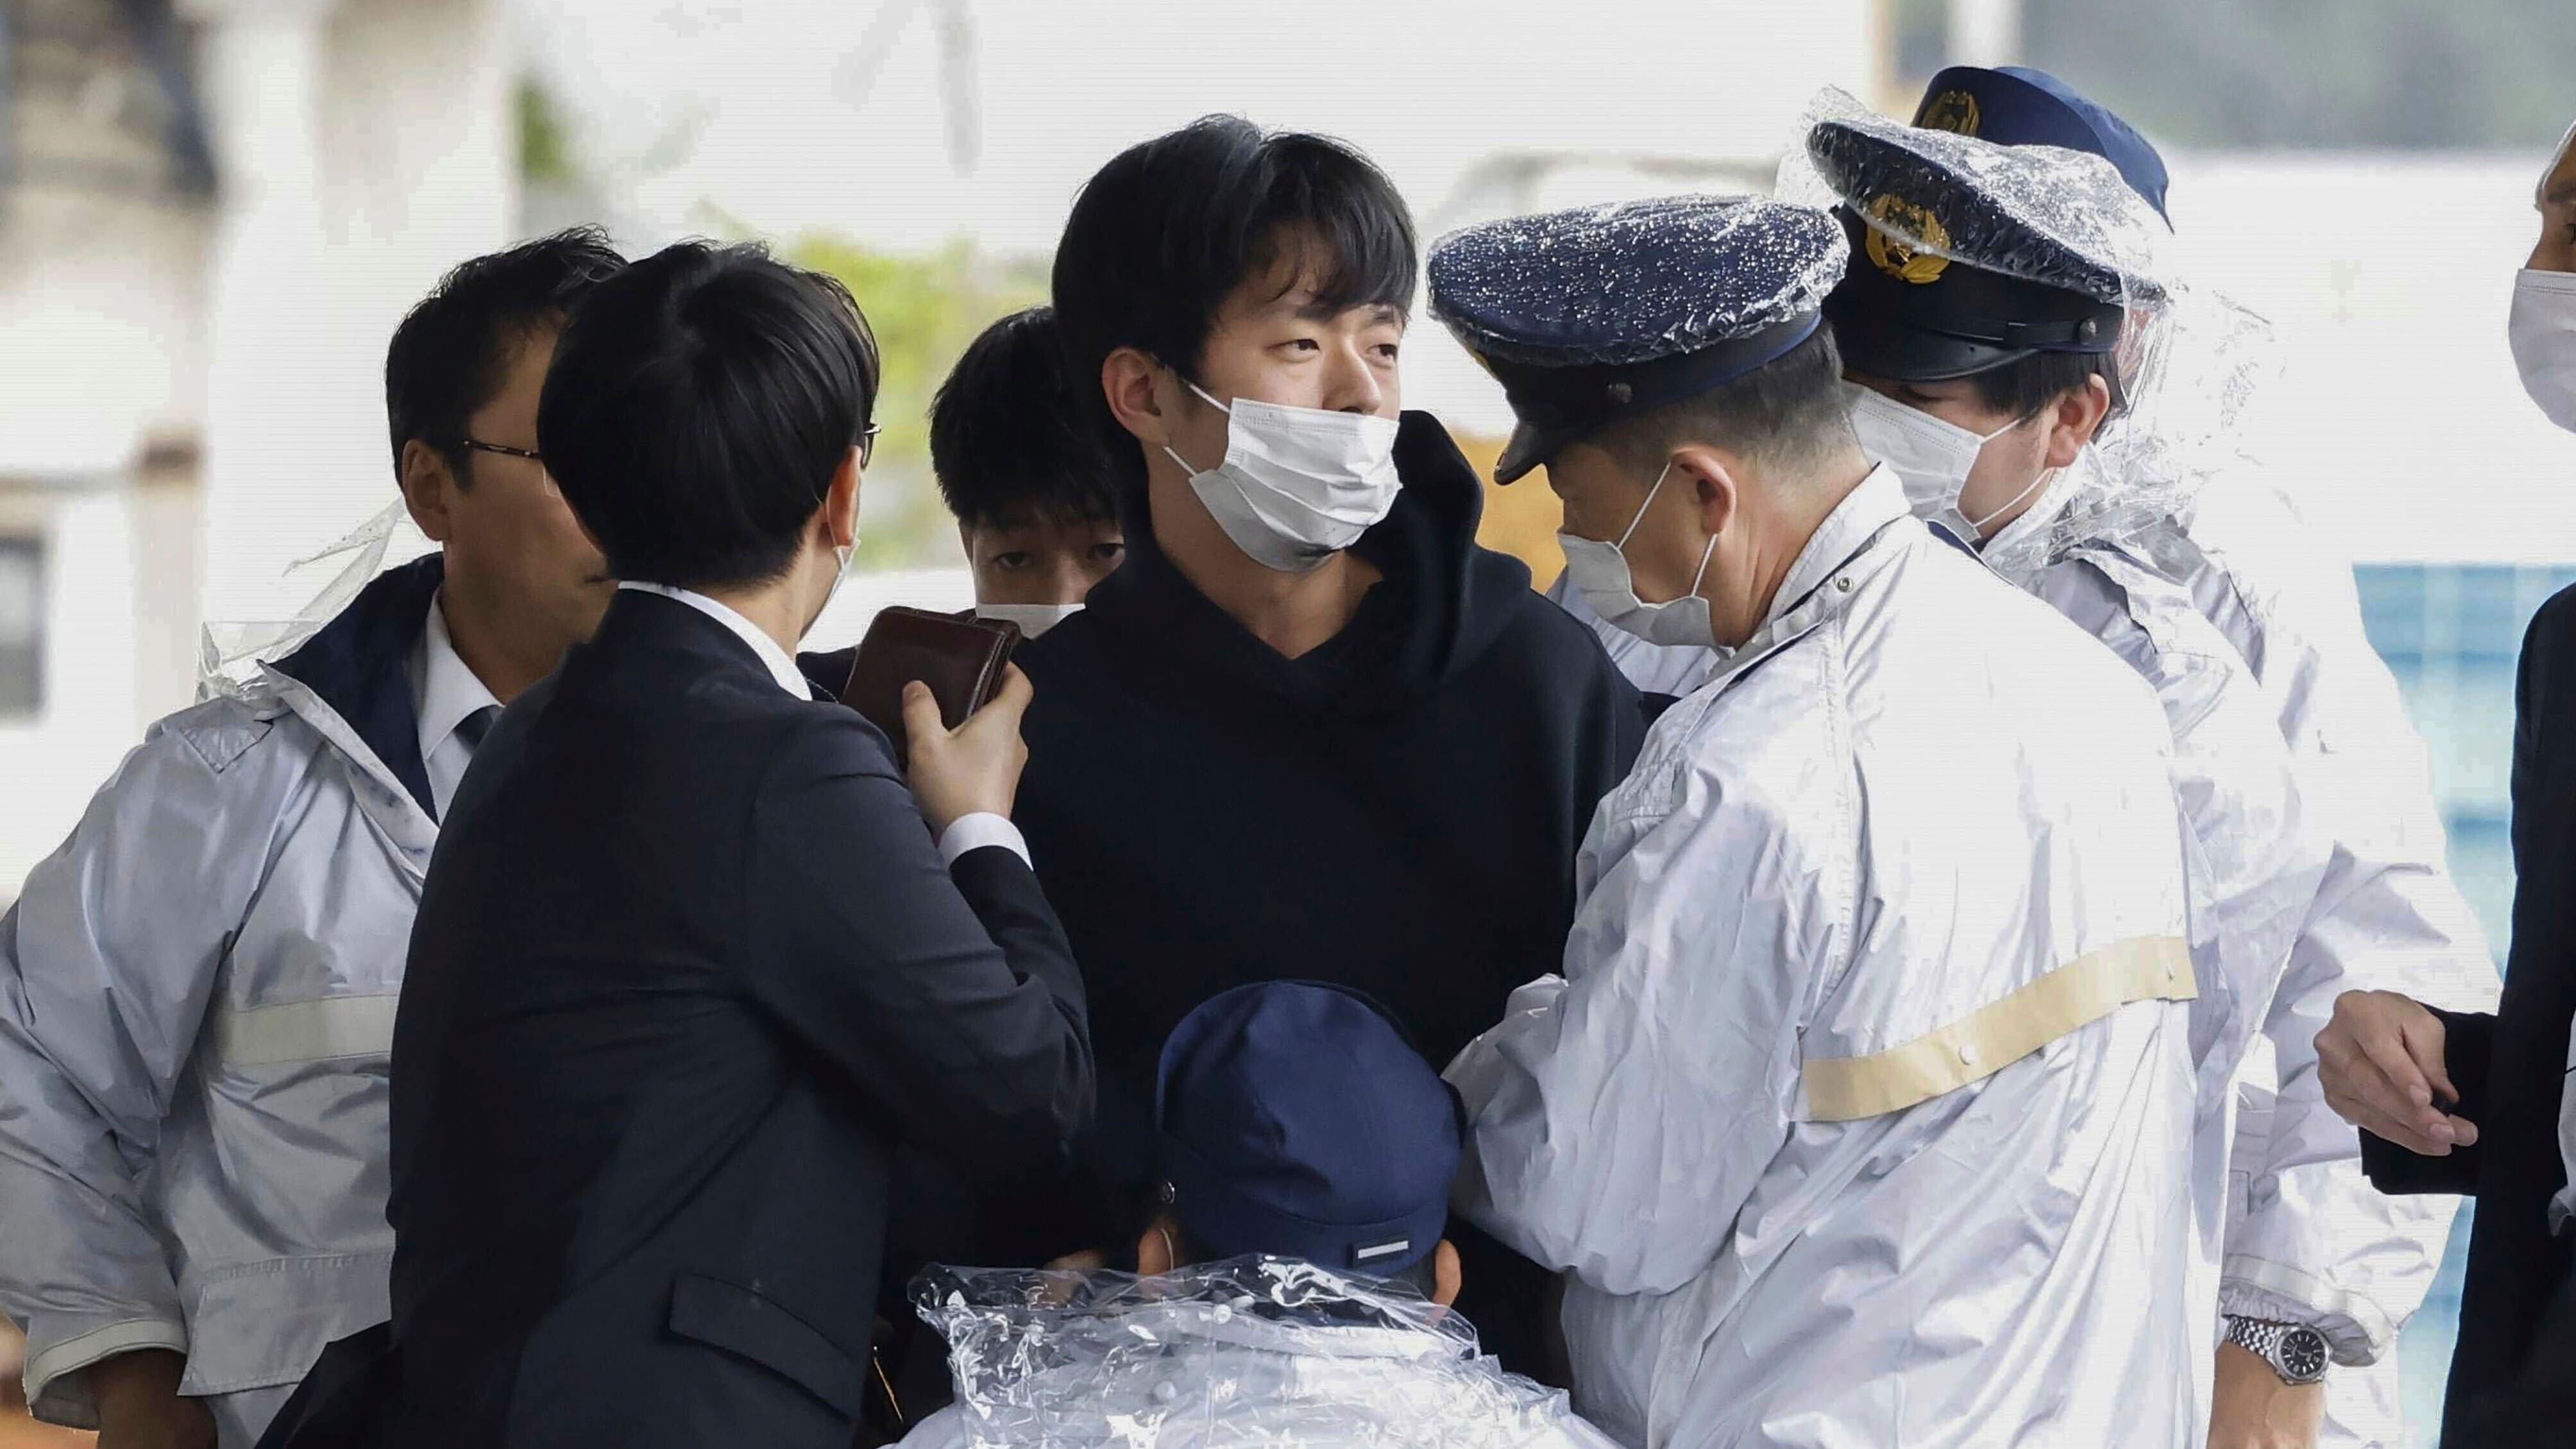 Ryuji Kimura was arrested after throwing what appeared to be a pipe bomb at Japanese Prime Minister Fumio Kishida (Kyodo News via AP)